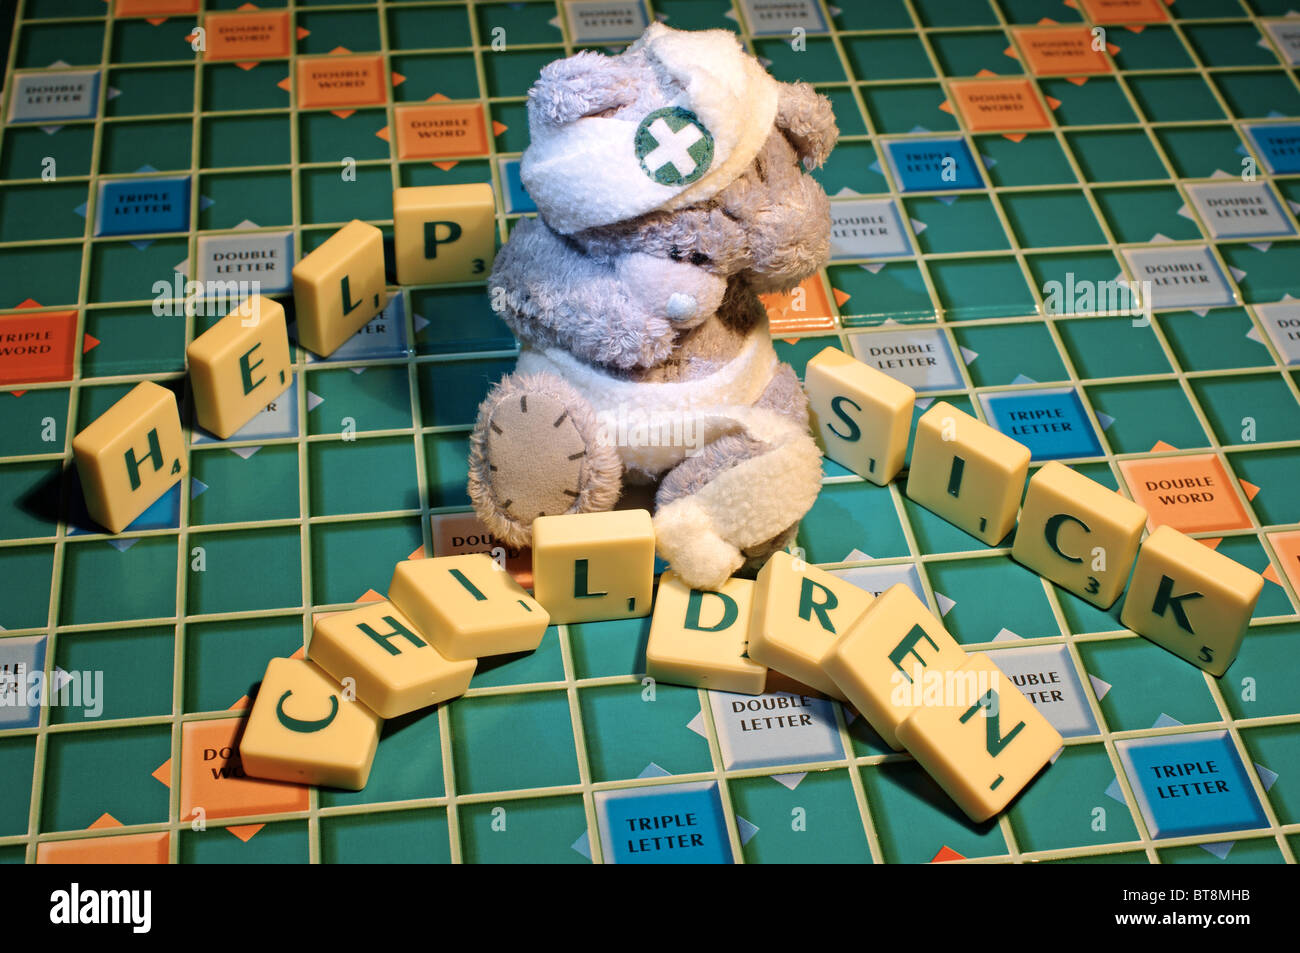 Childs teddy bear with scrabble letters, help sick children. Stock Photo